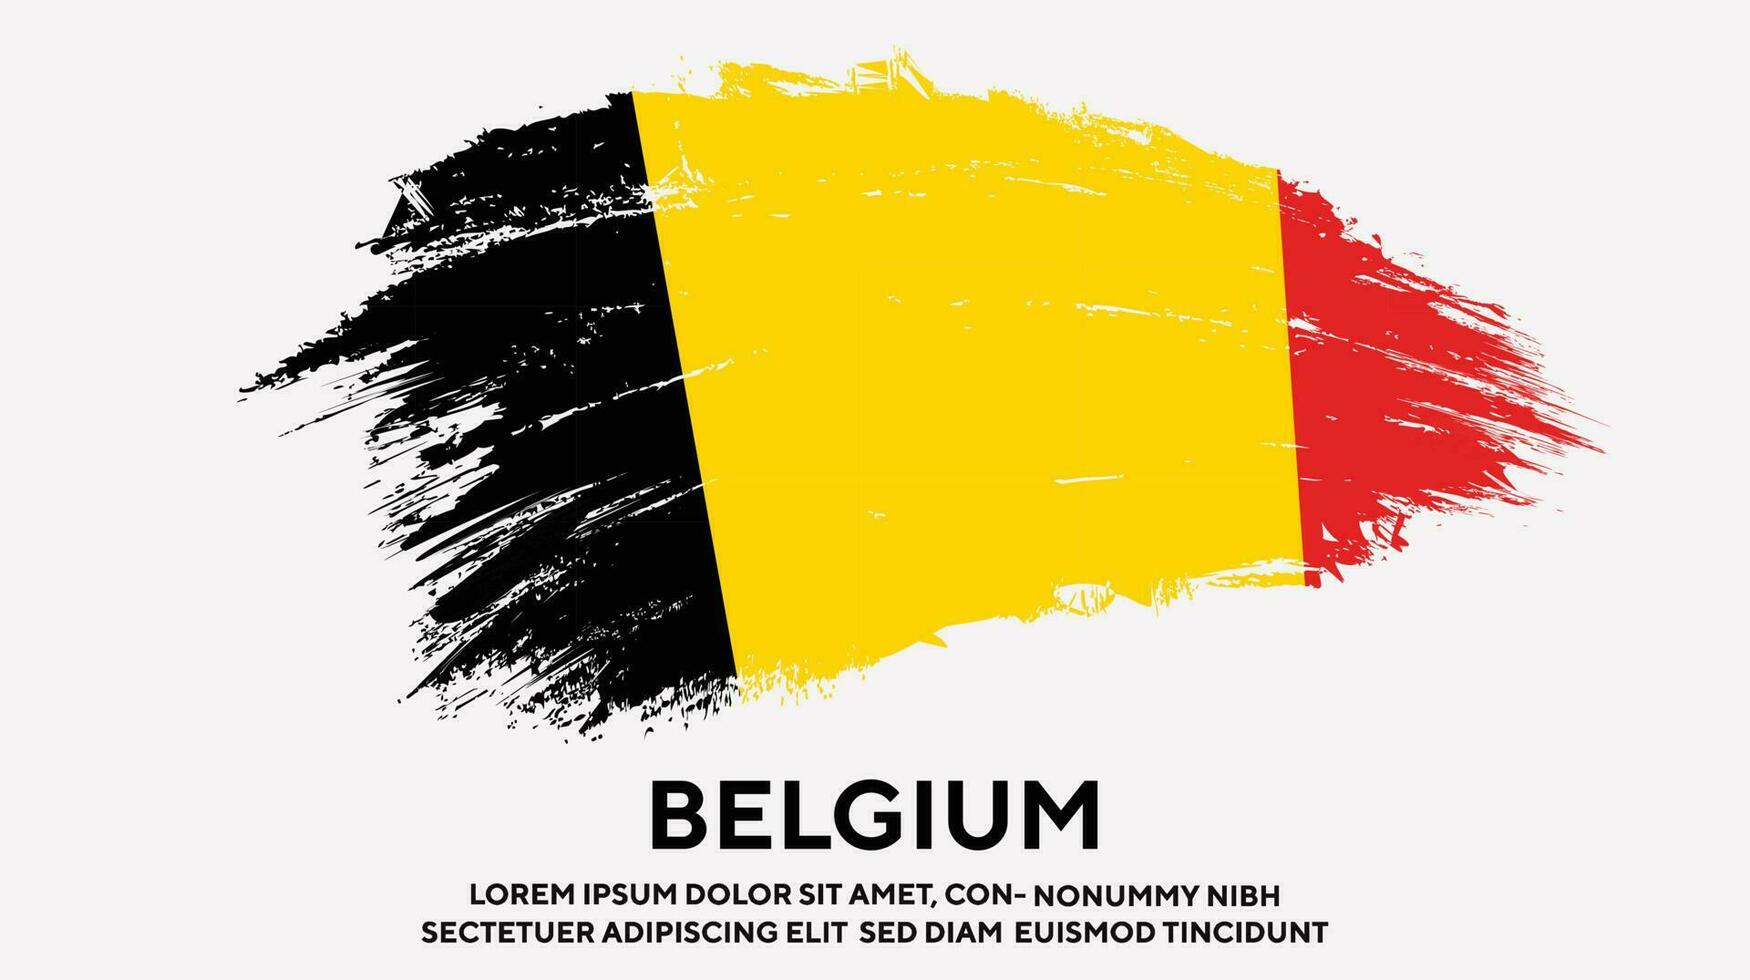 Faded Belgium grunge texture colorful flag design vector